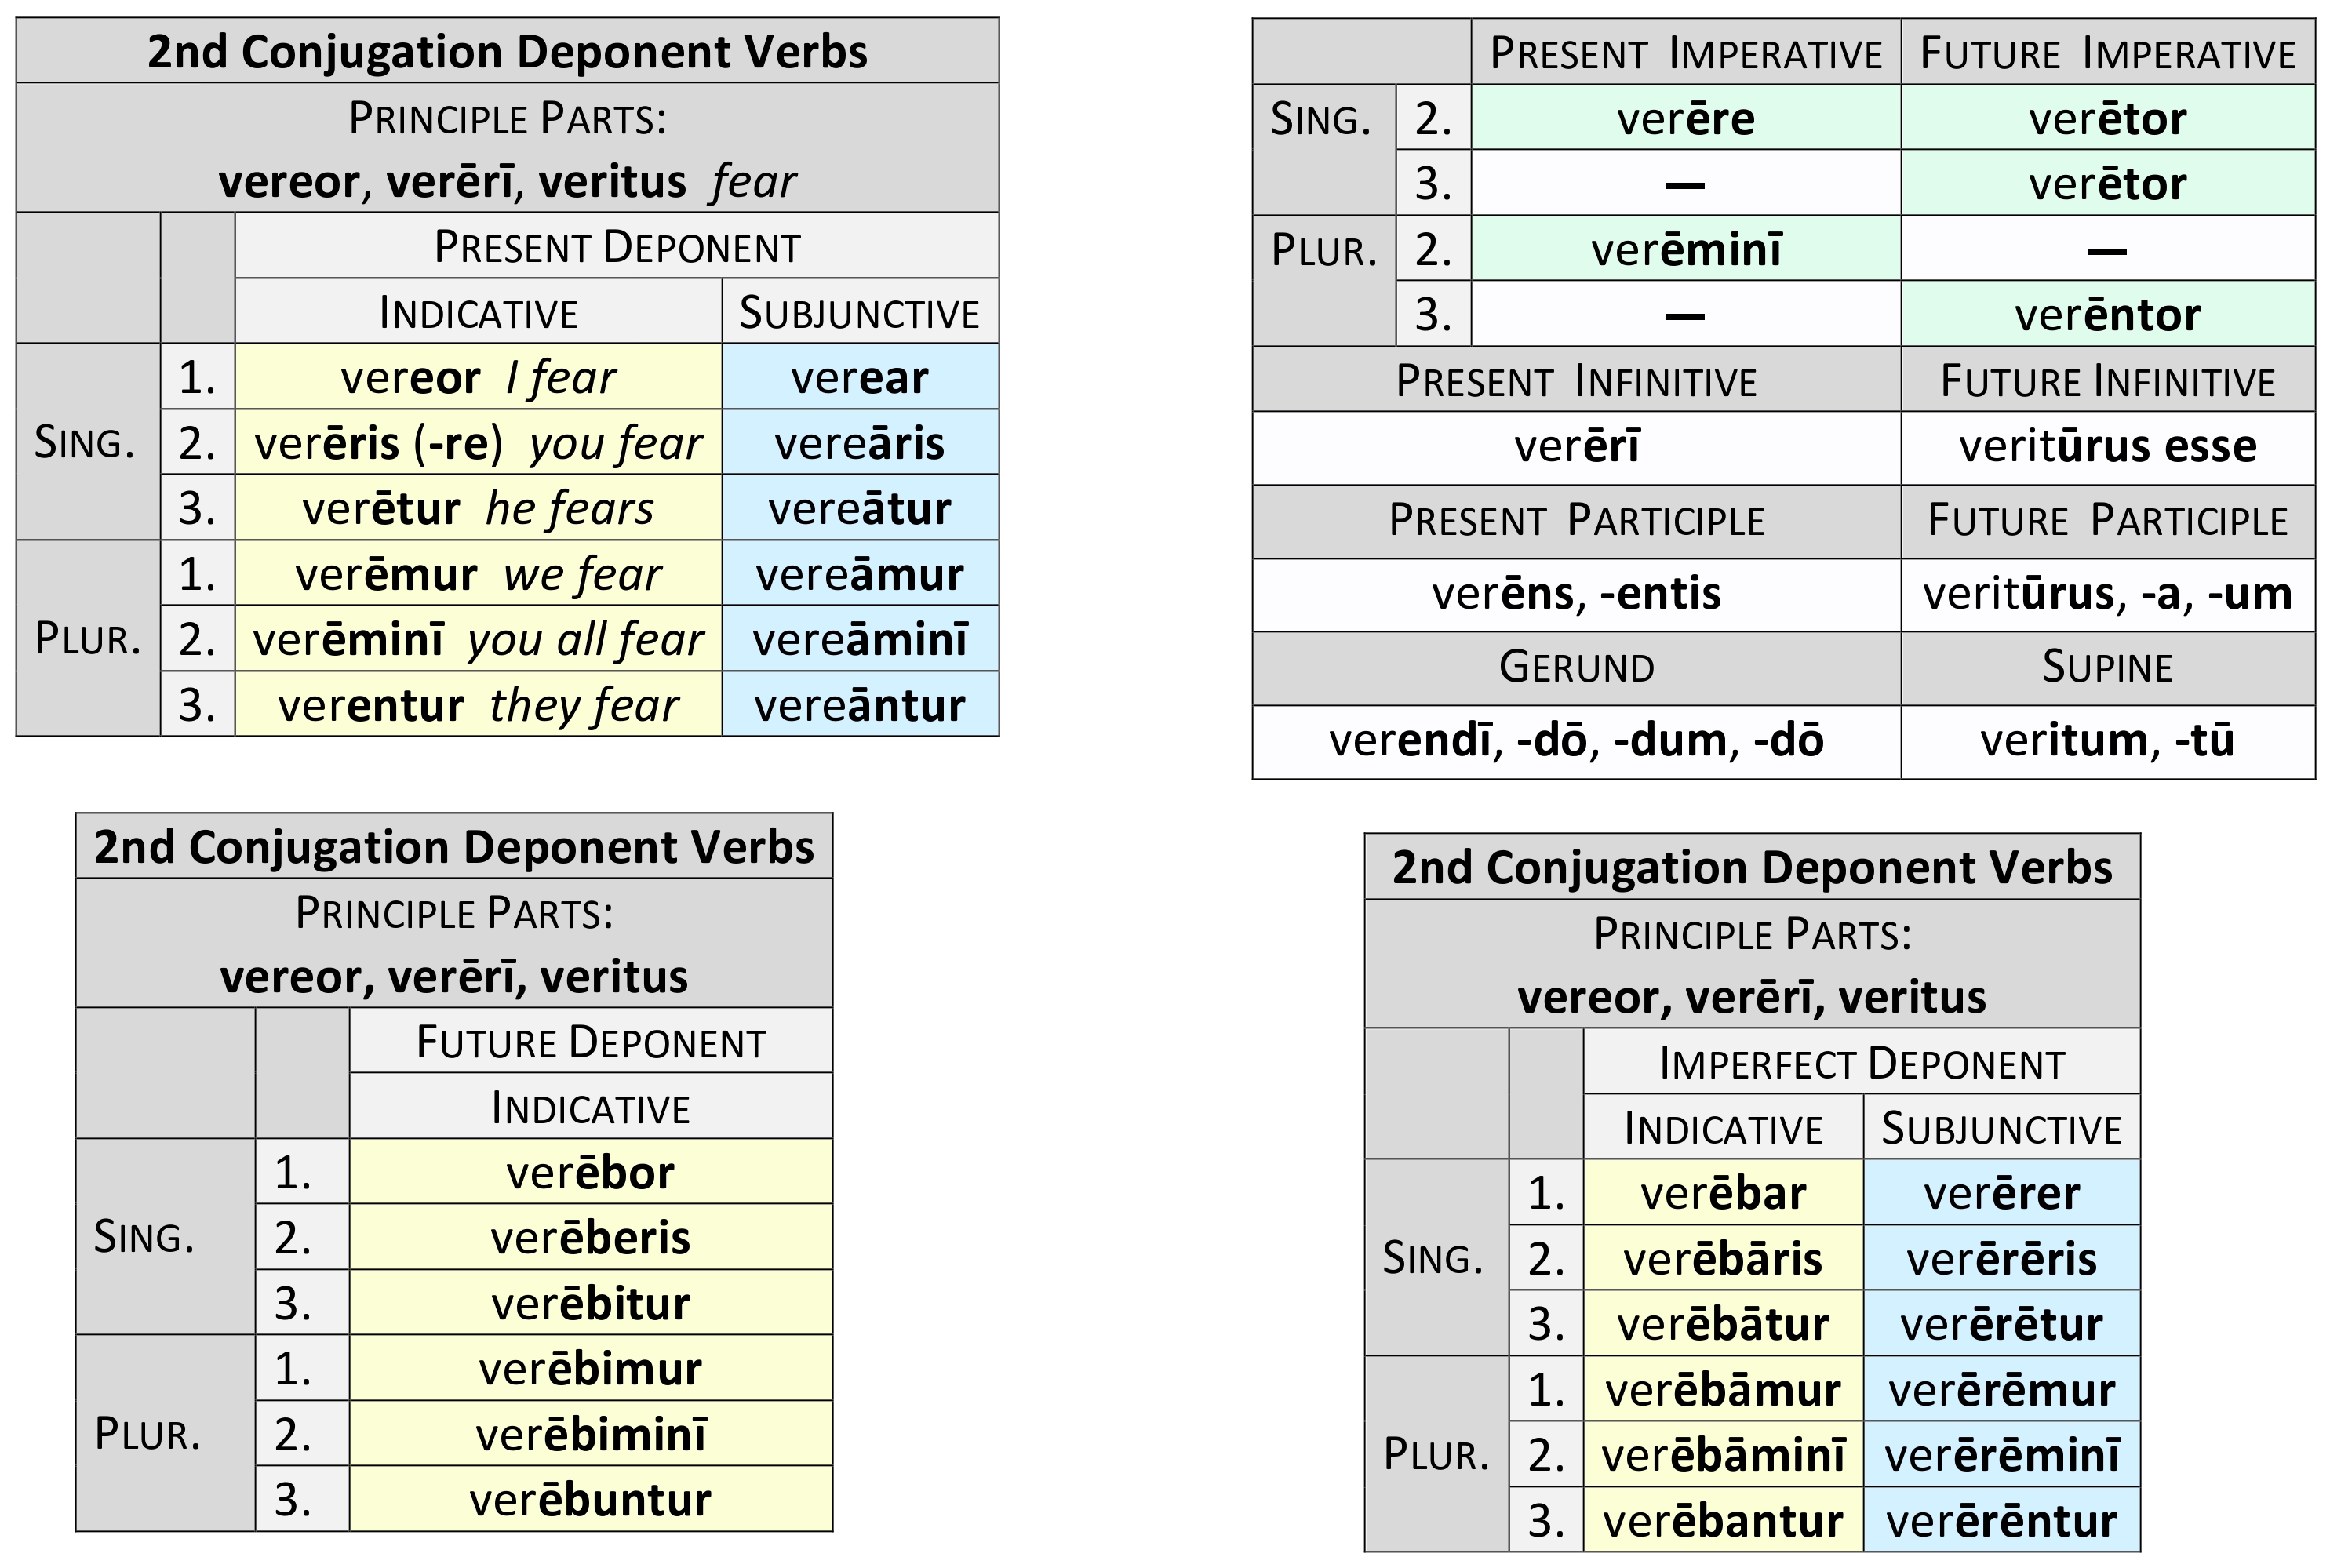 How Many Deponent Verbs Are There In Latin